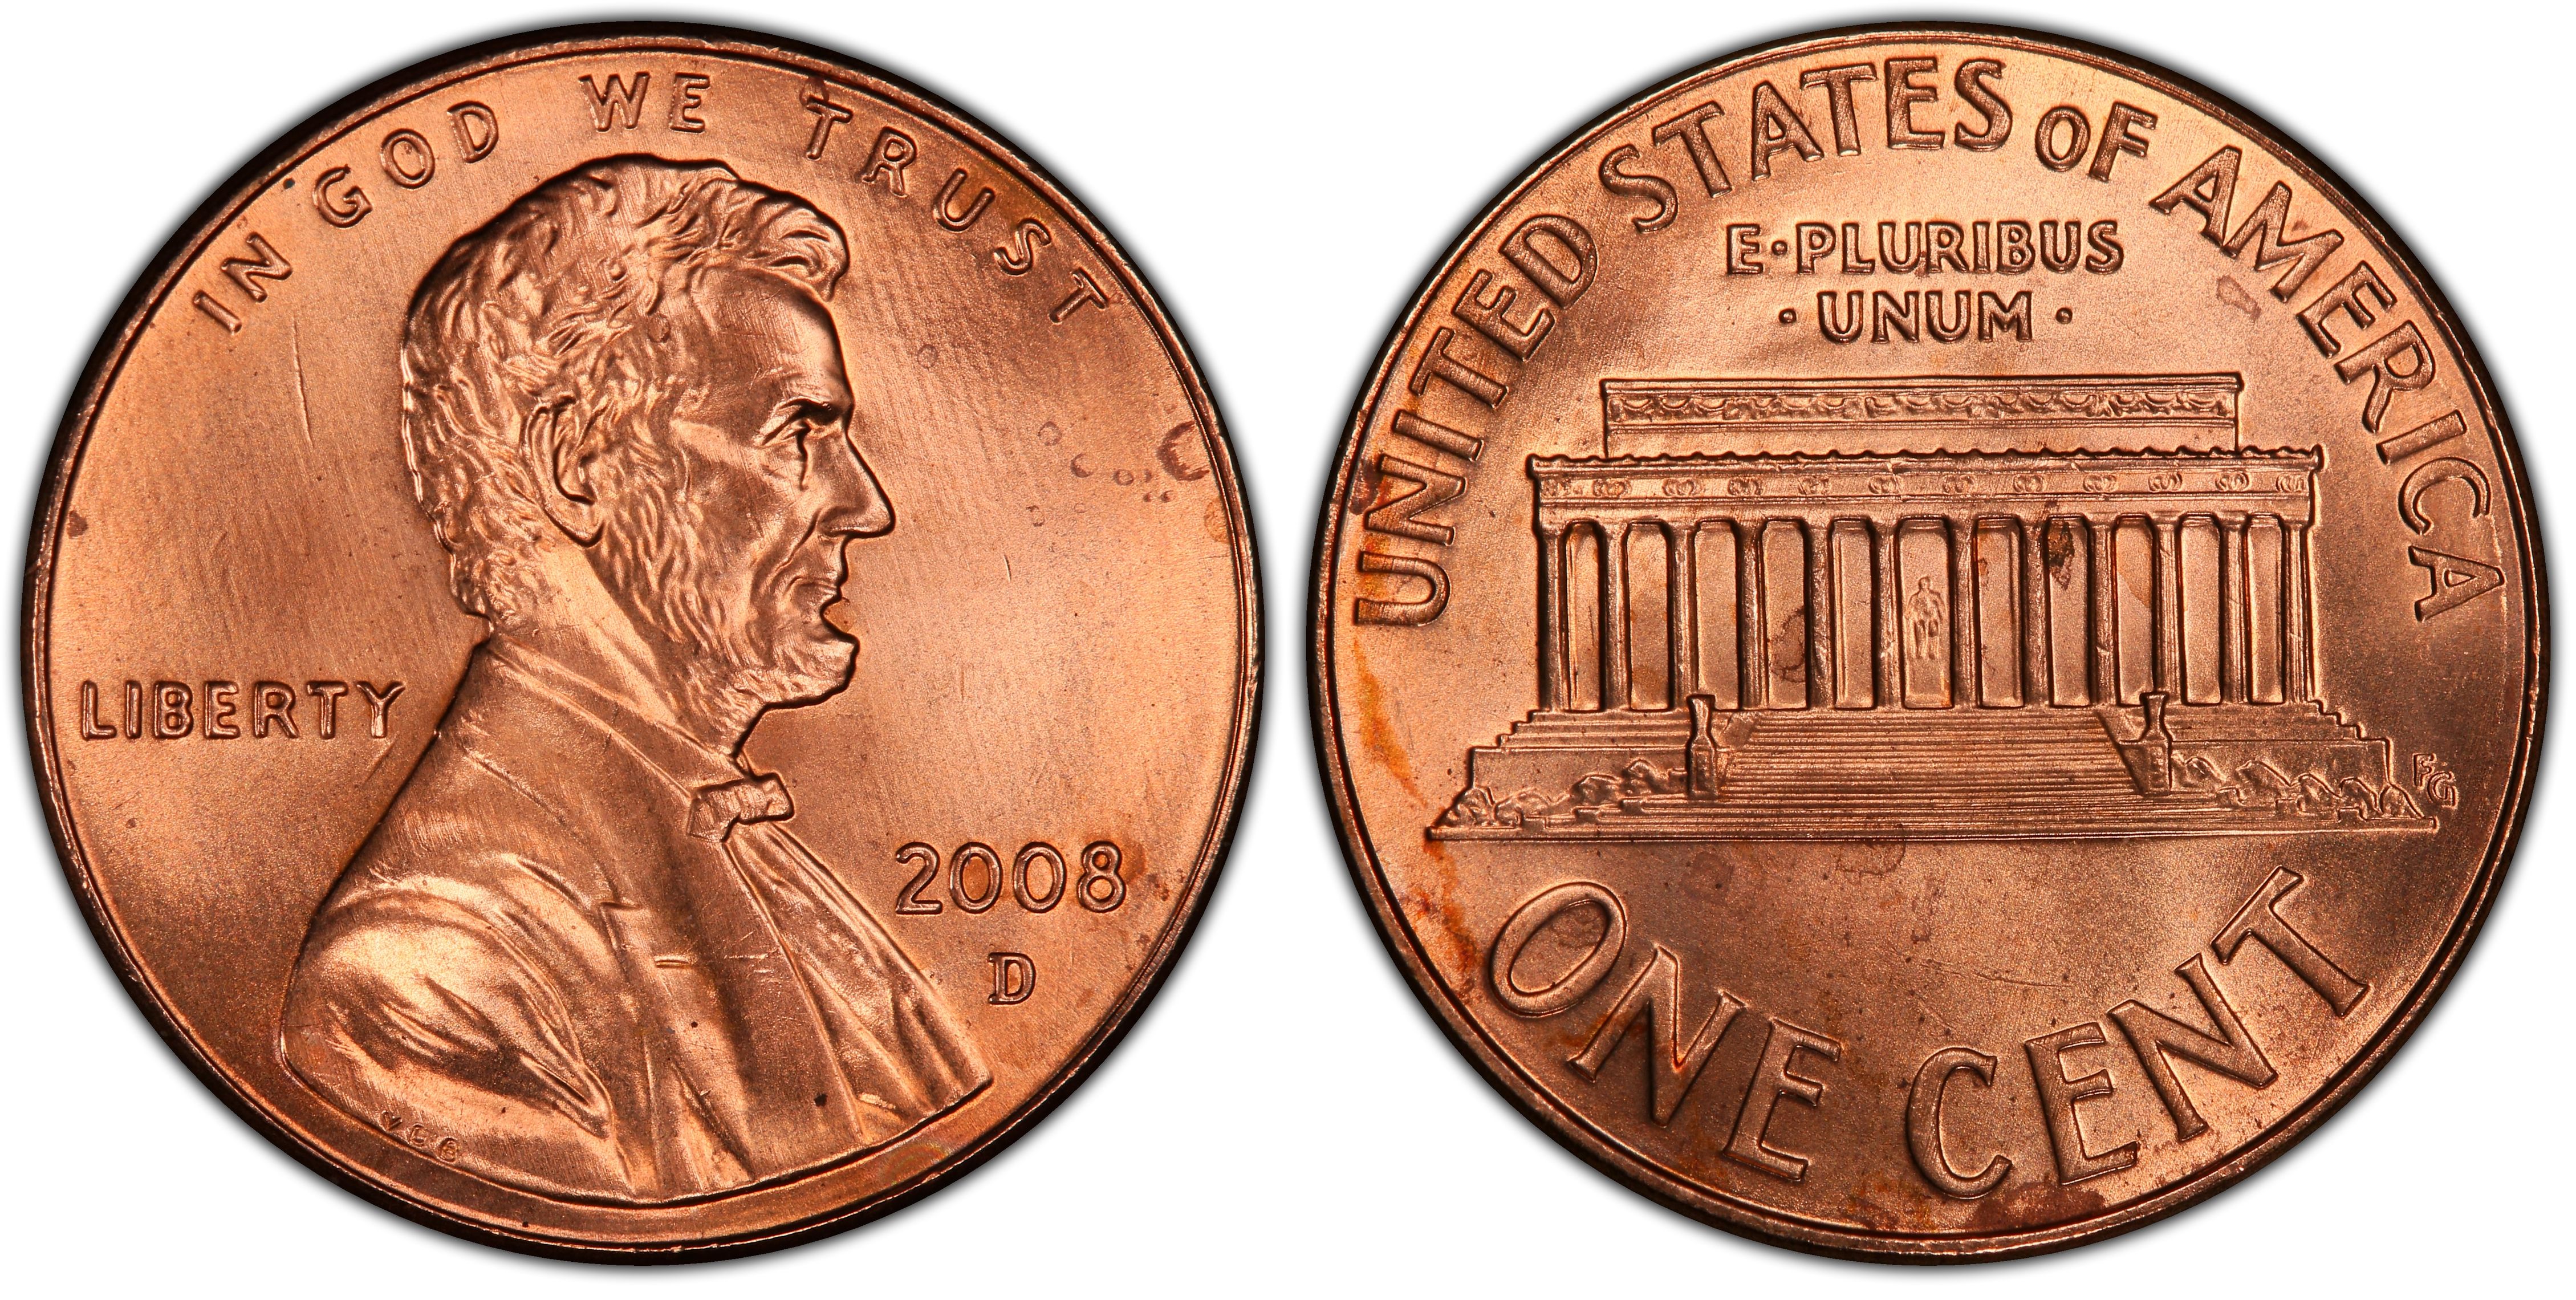 1943/2-S 1C (Steel) Lincoln Cent PCGS MS67+ (CAC)